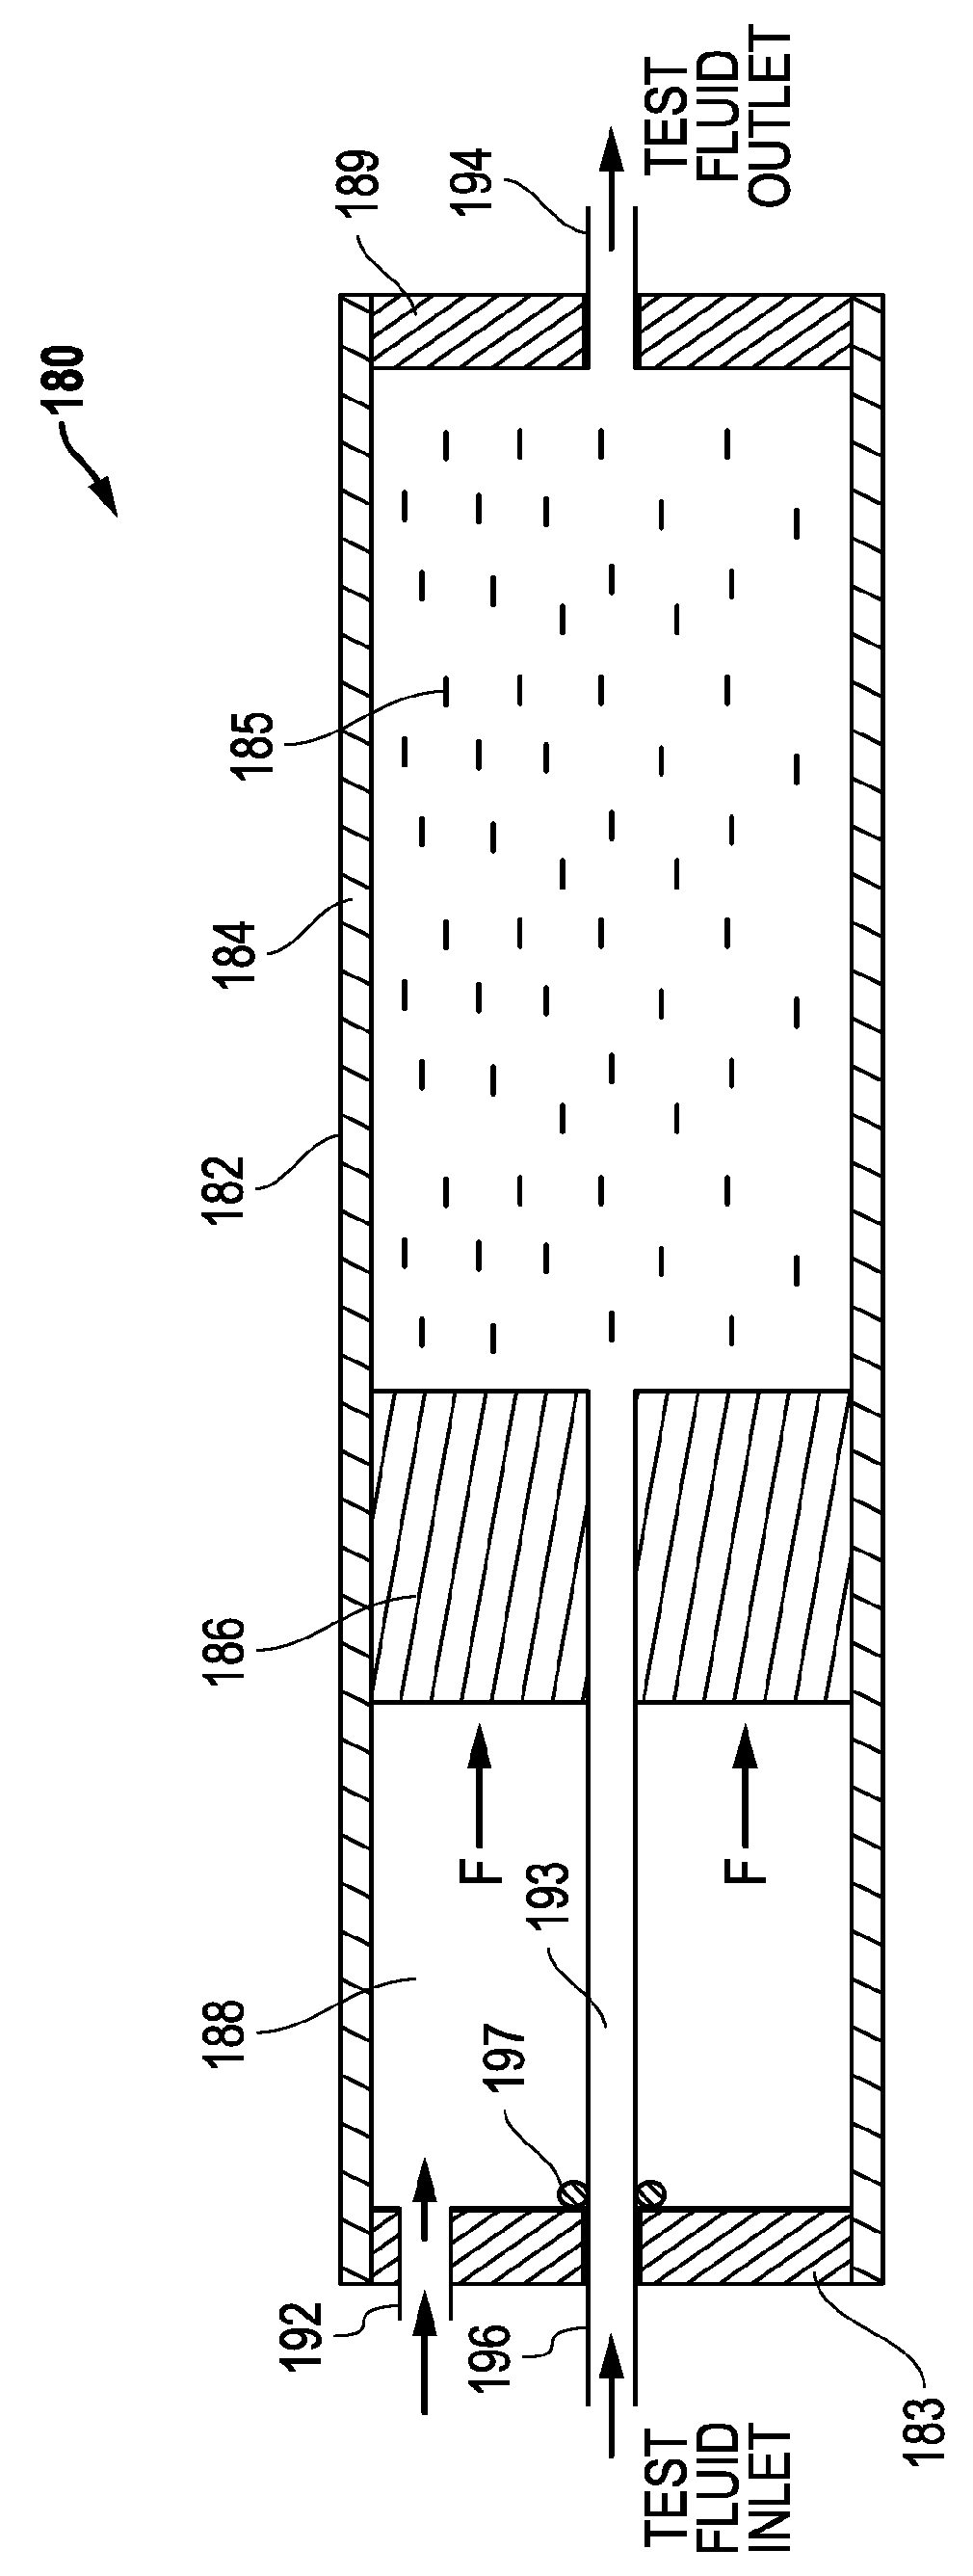 Methods and systems for testing fluids on crushed formation materials under conditions of stress